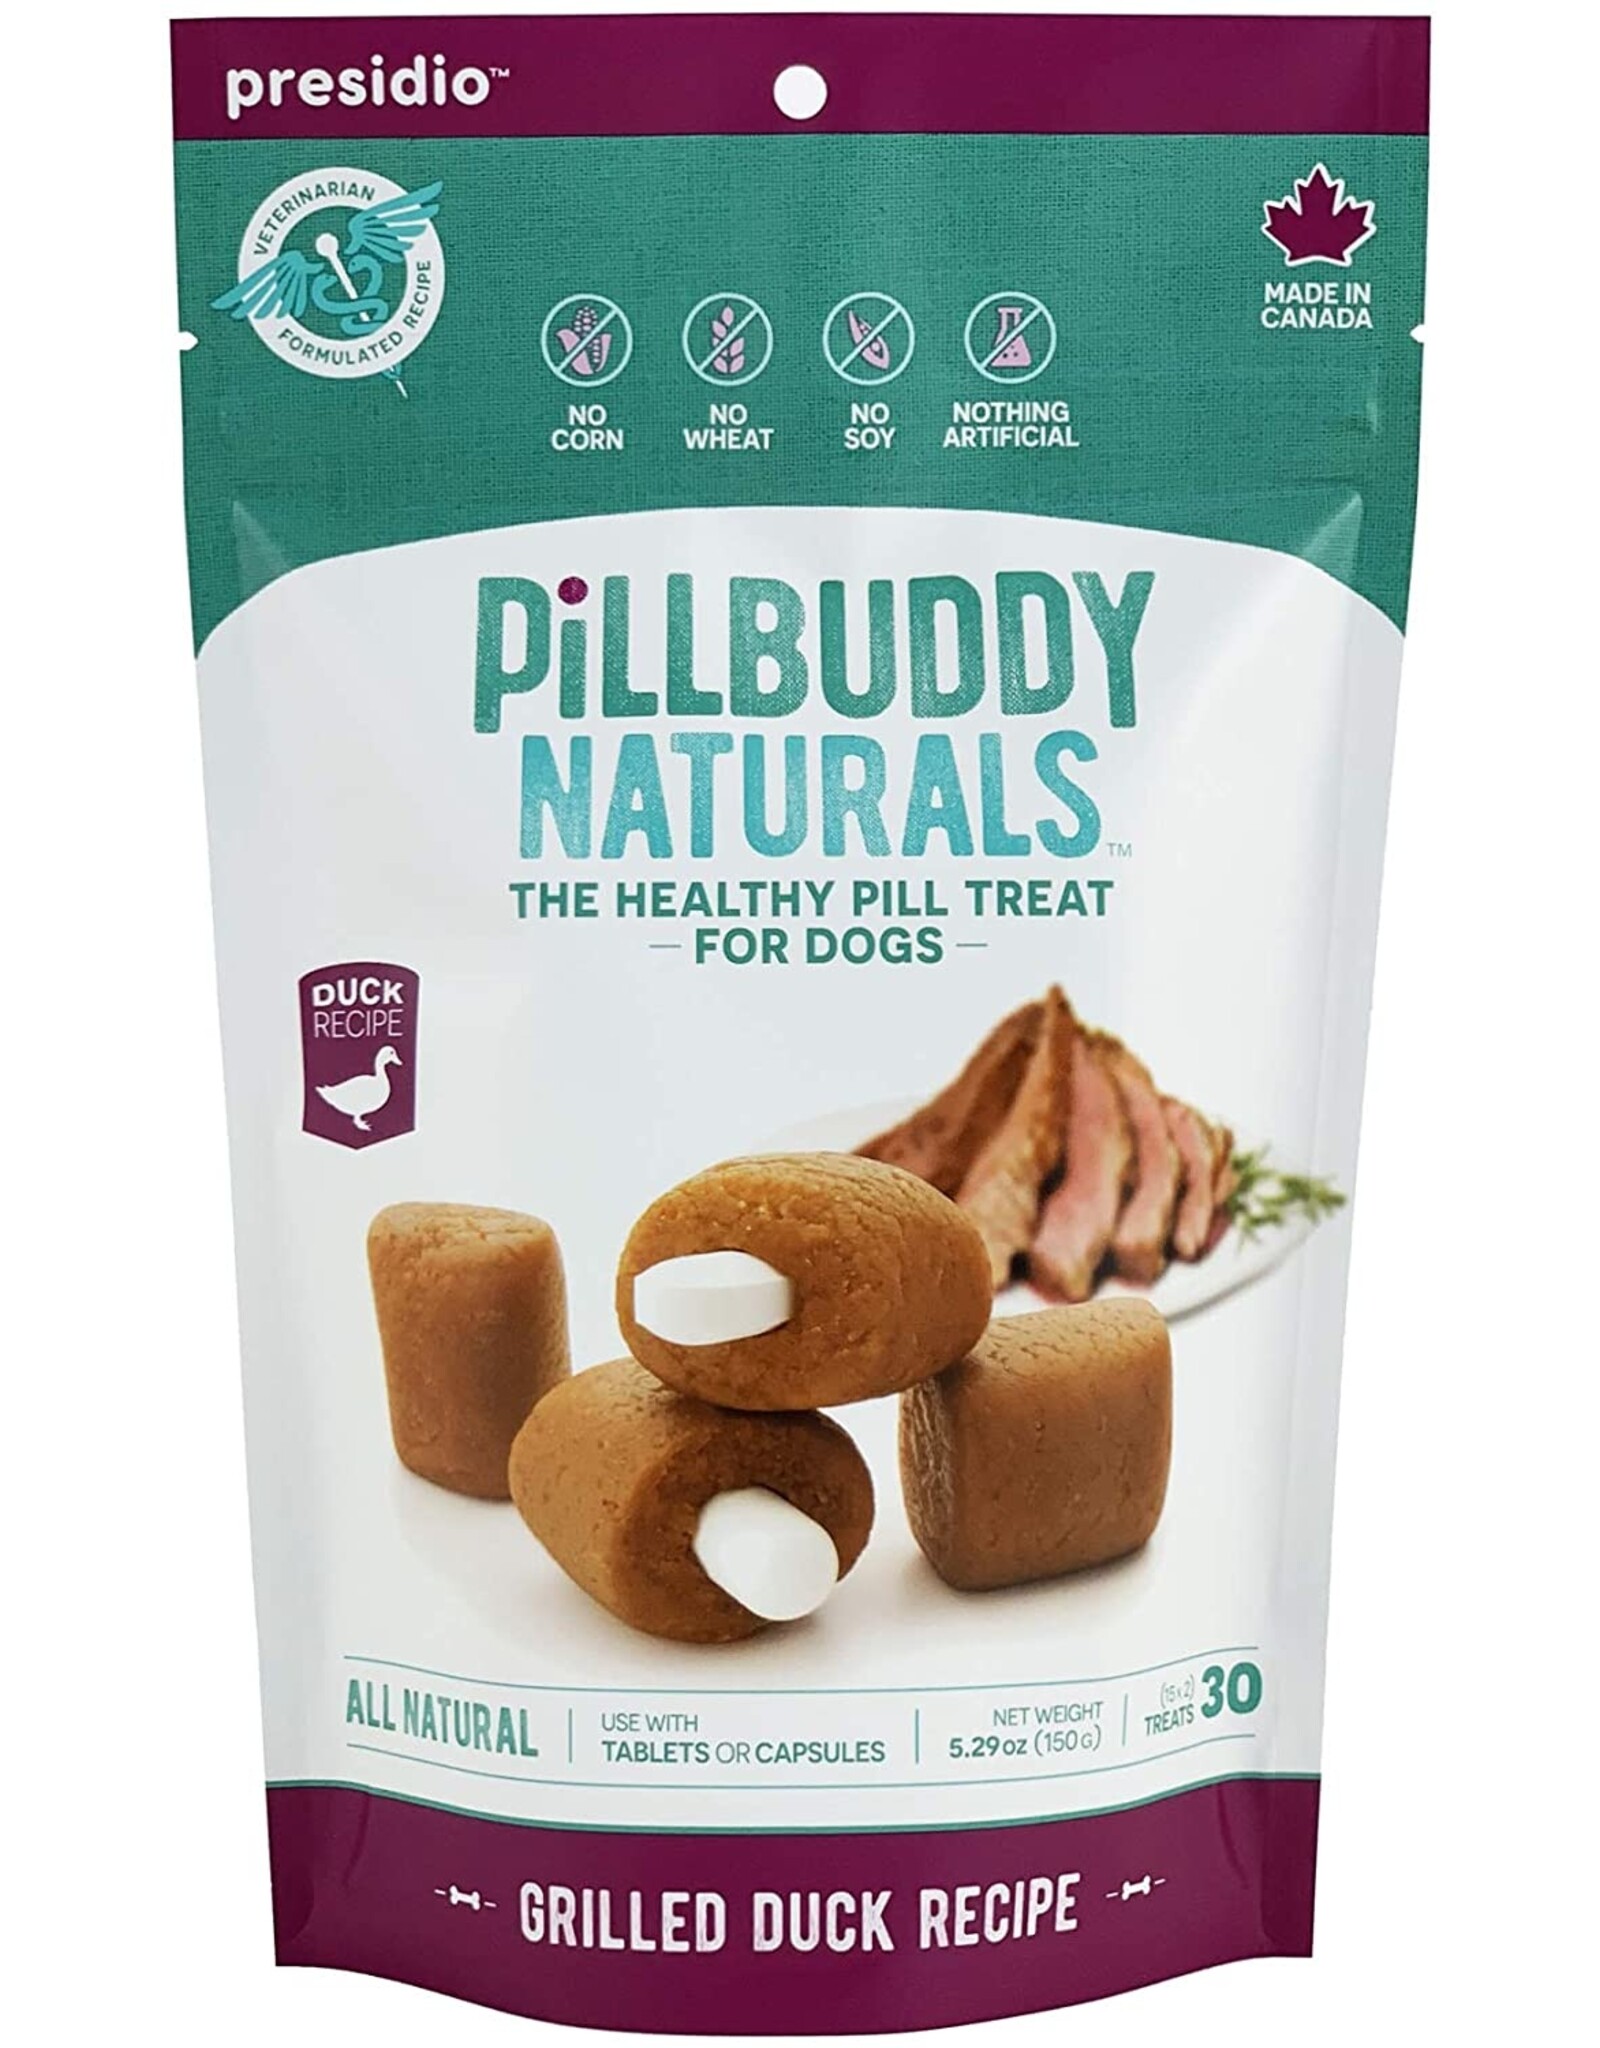 Complete Natural Nutrition Pill Buddy - Duck